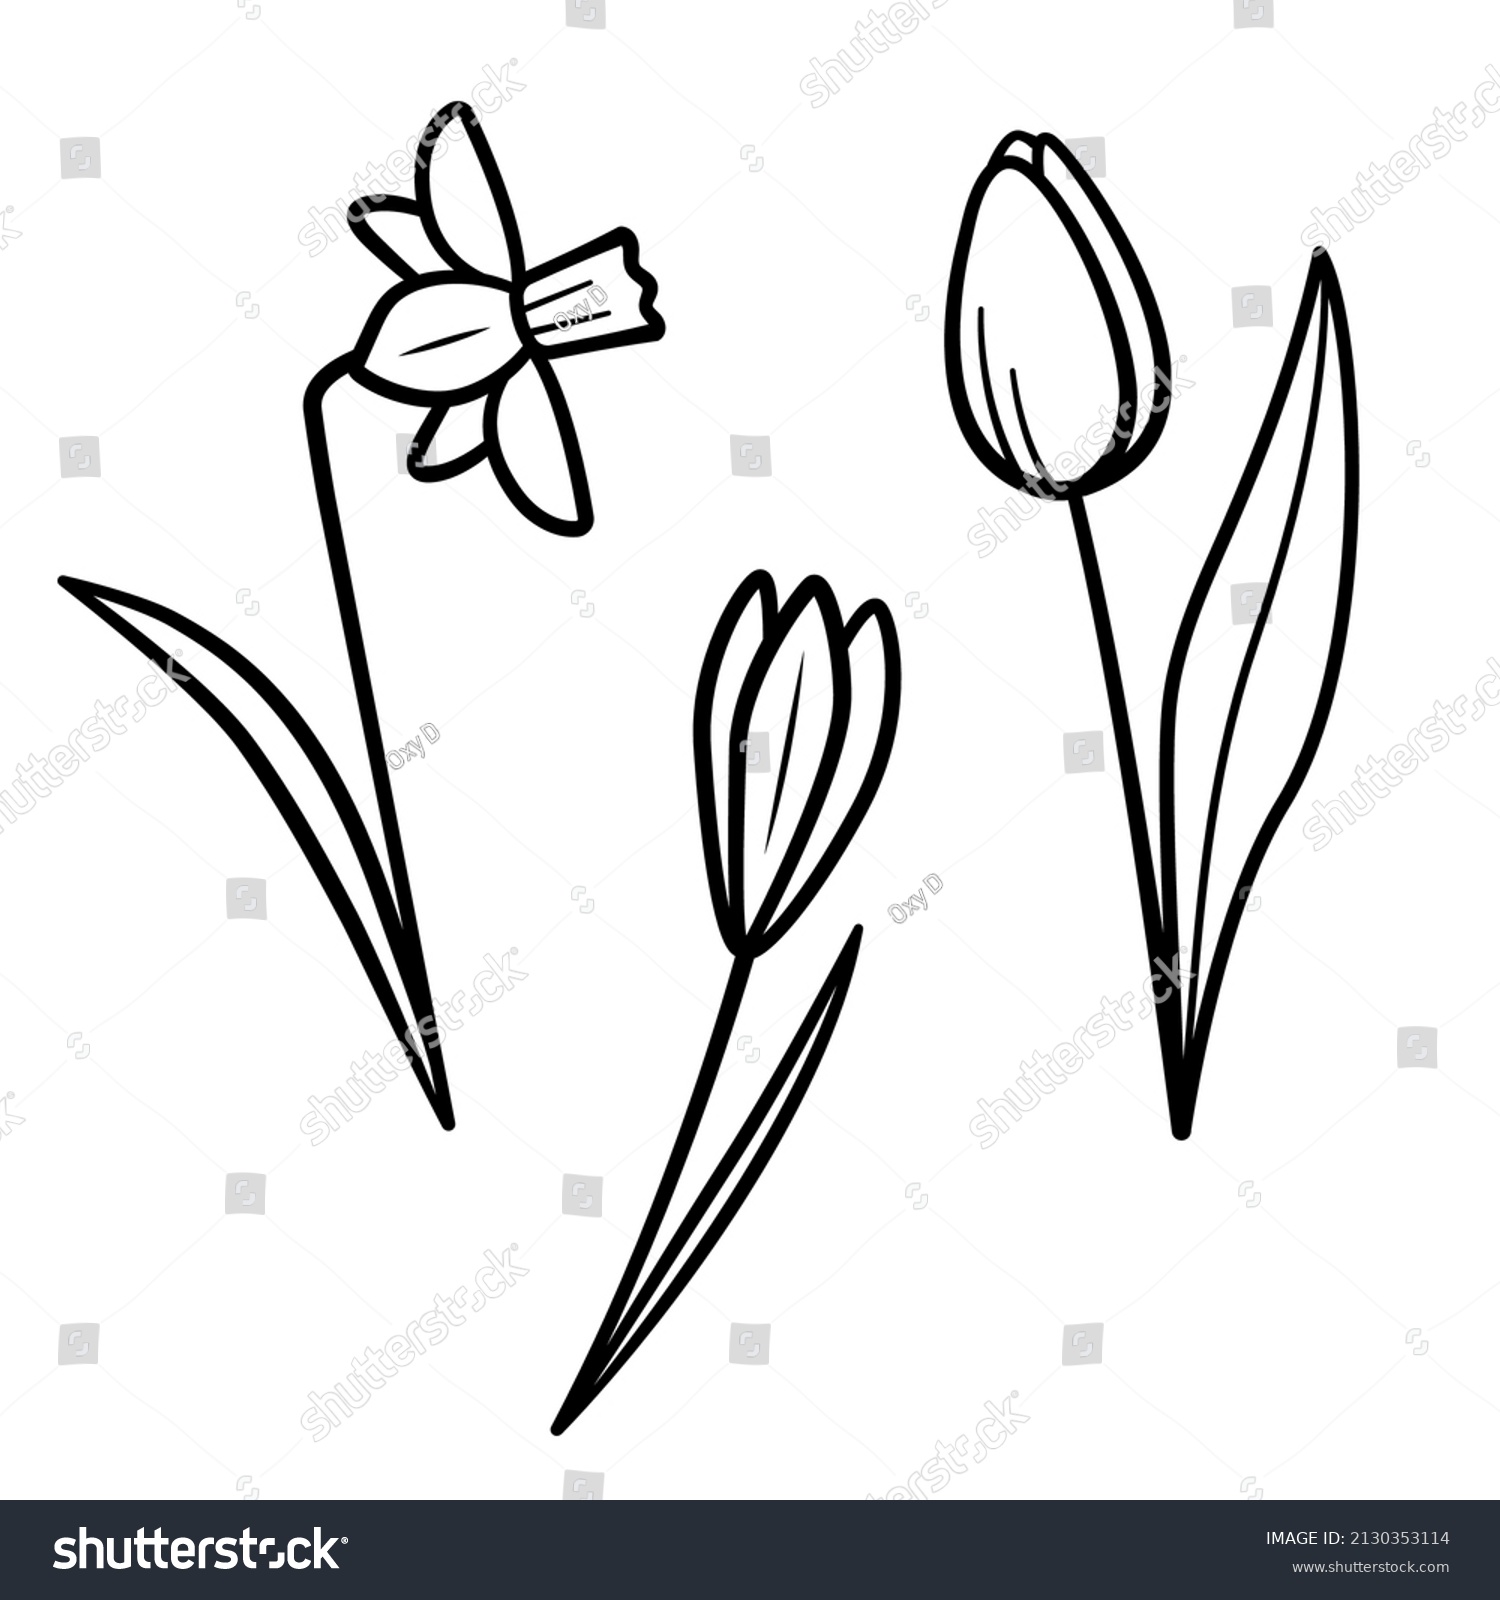 SVG of Spring flowers set. Hand drawn sketch icons of tulip, daffodil, crocus. Isolated vector illustration in doodle line style. svg